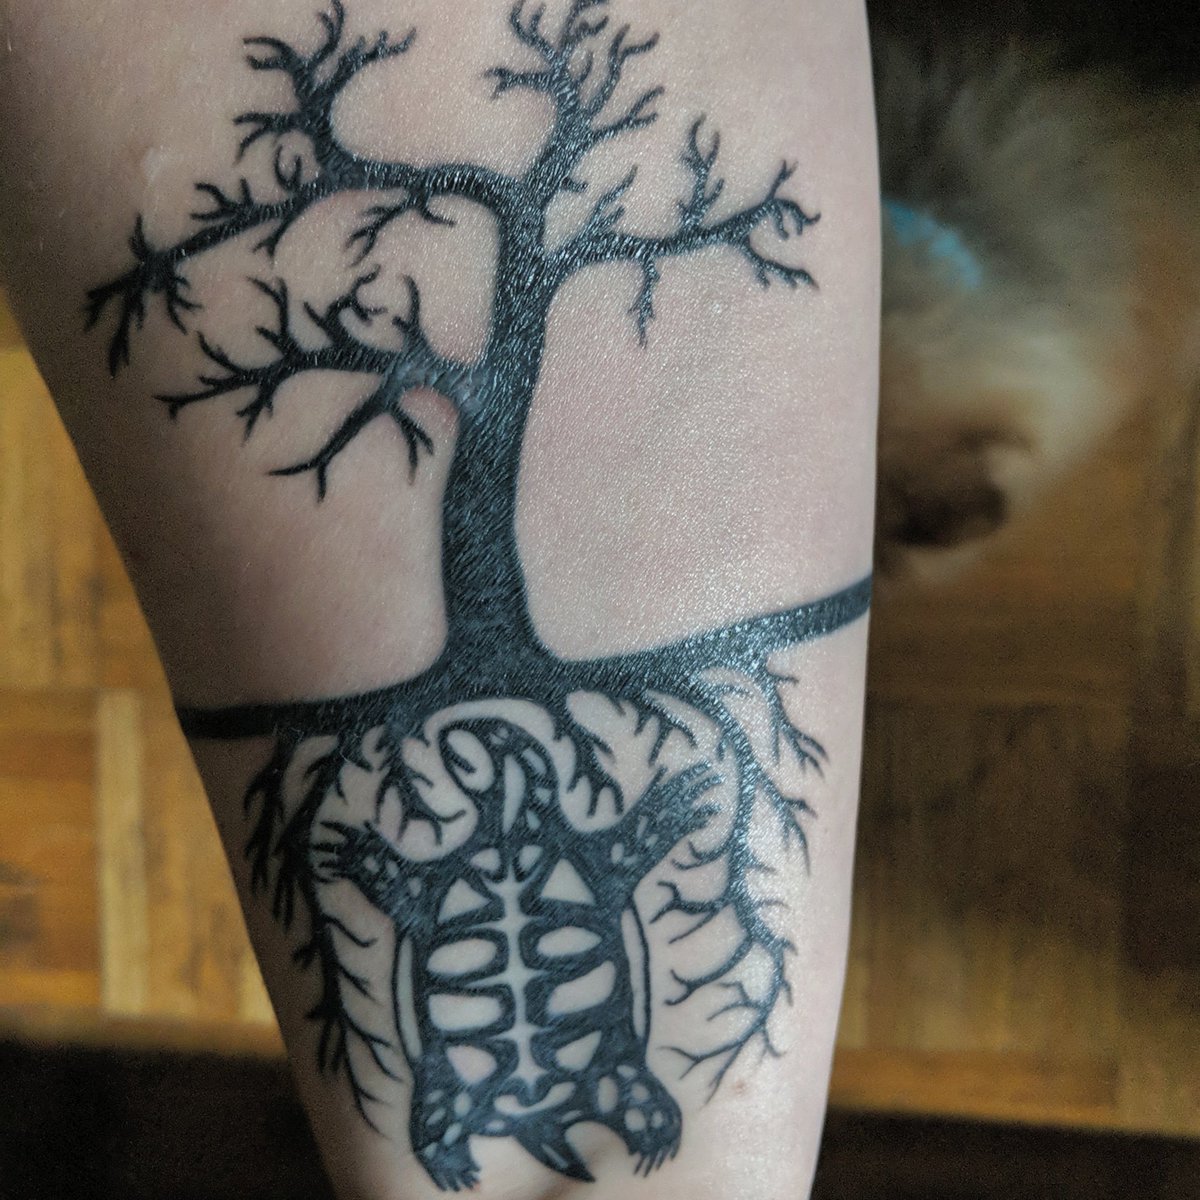 My miskwaadesi is healing nicely now, with no help from my dog scratch on the bottom tree branch.

#tattoo #tattooculture #firstnations #Anishinaabe #ojibwe #indigenous #indigenousart #firstnationsartist #woodlands #TurtleIsland #canadianartist #edmontonartist #yegartist